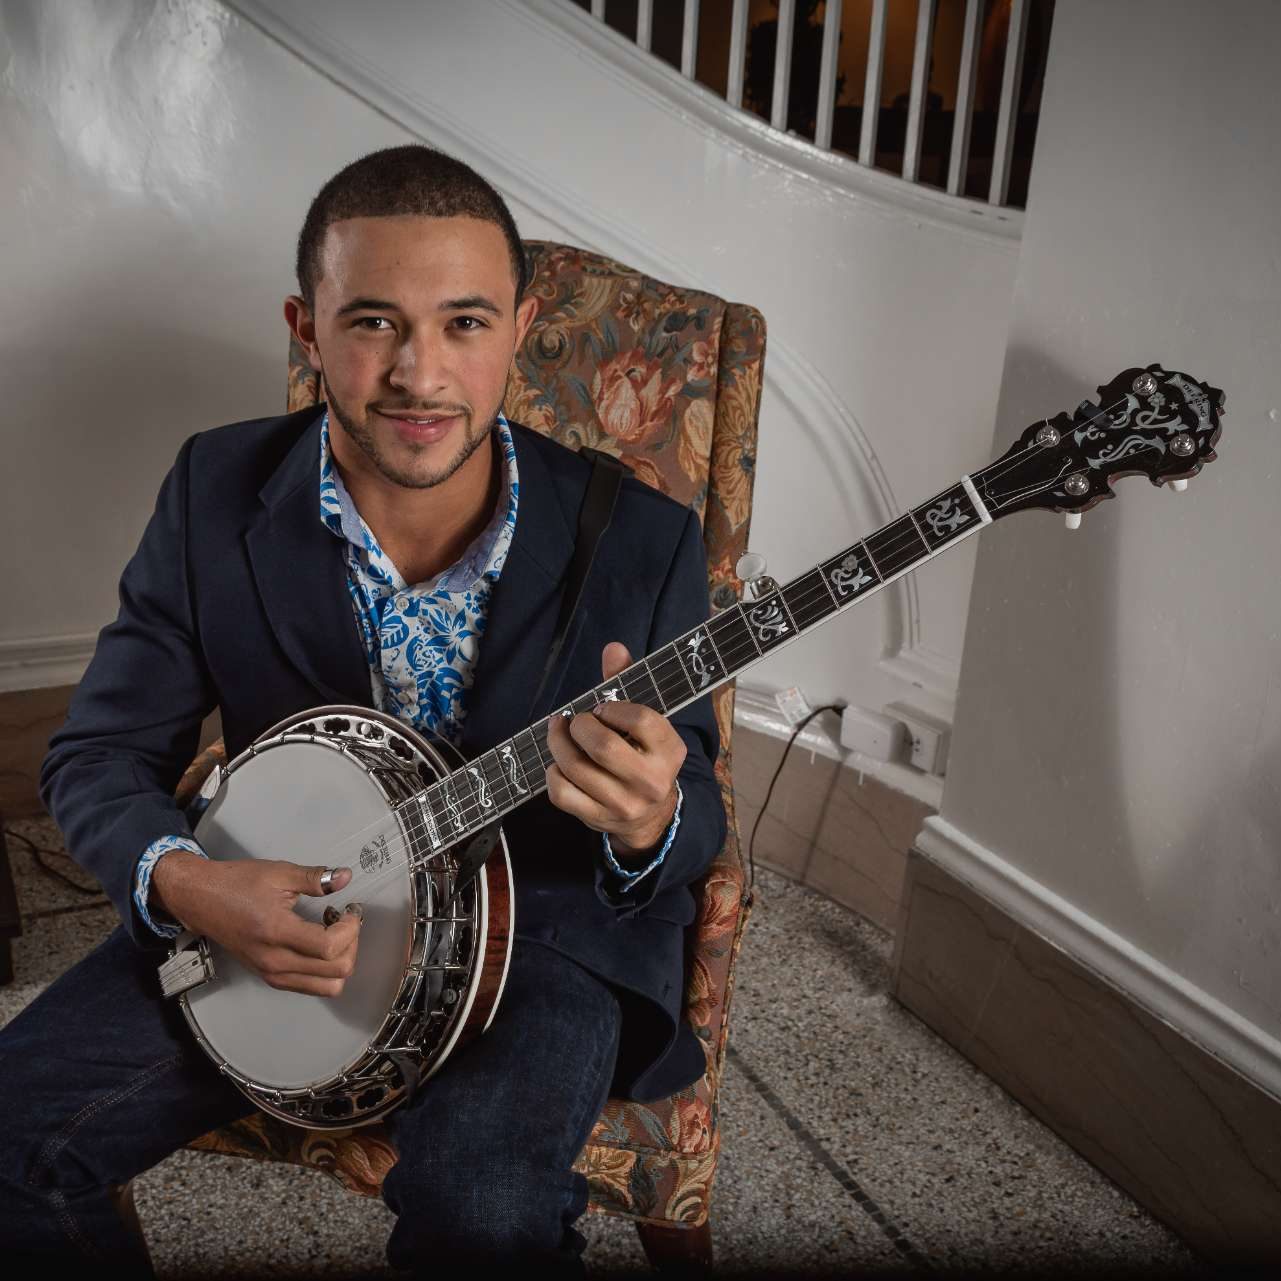 Tray Wellington Conquers World of Bluegrass With His Five-String Banjo